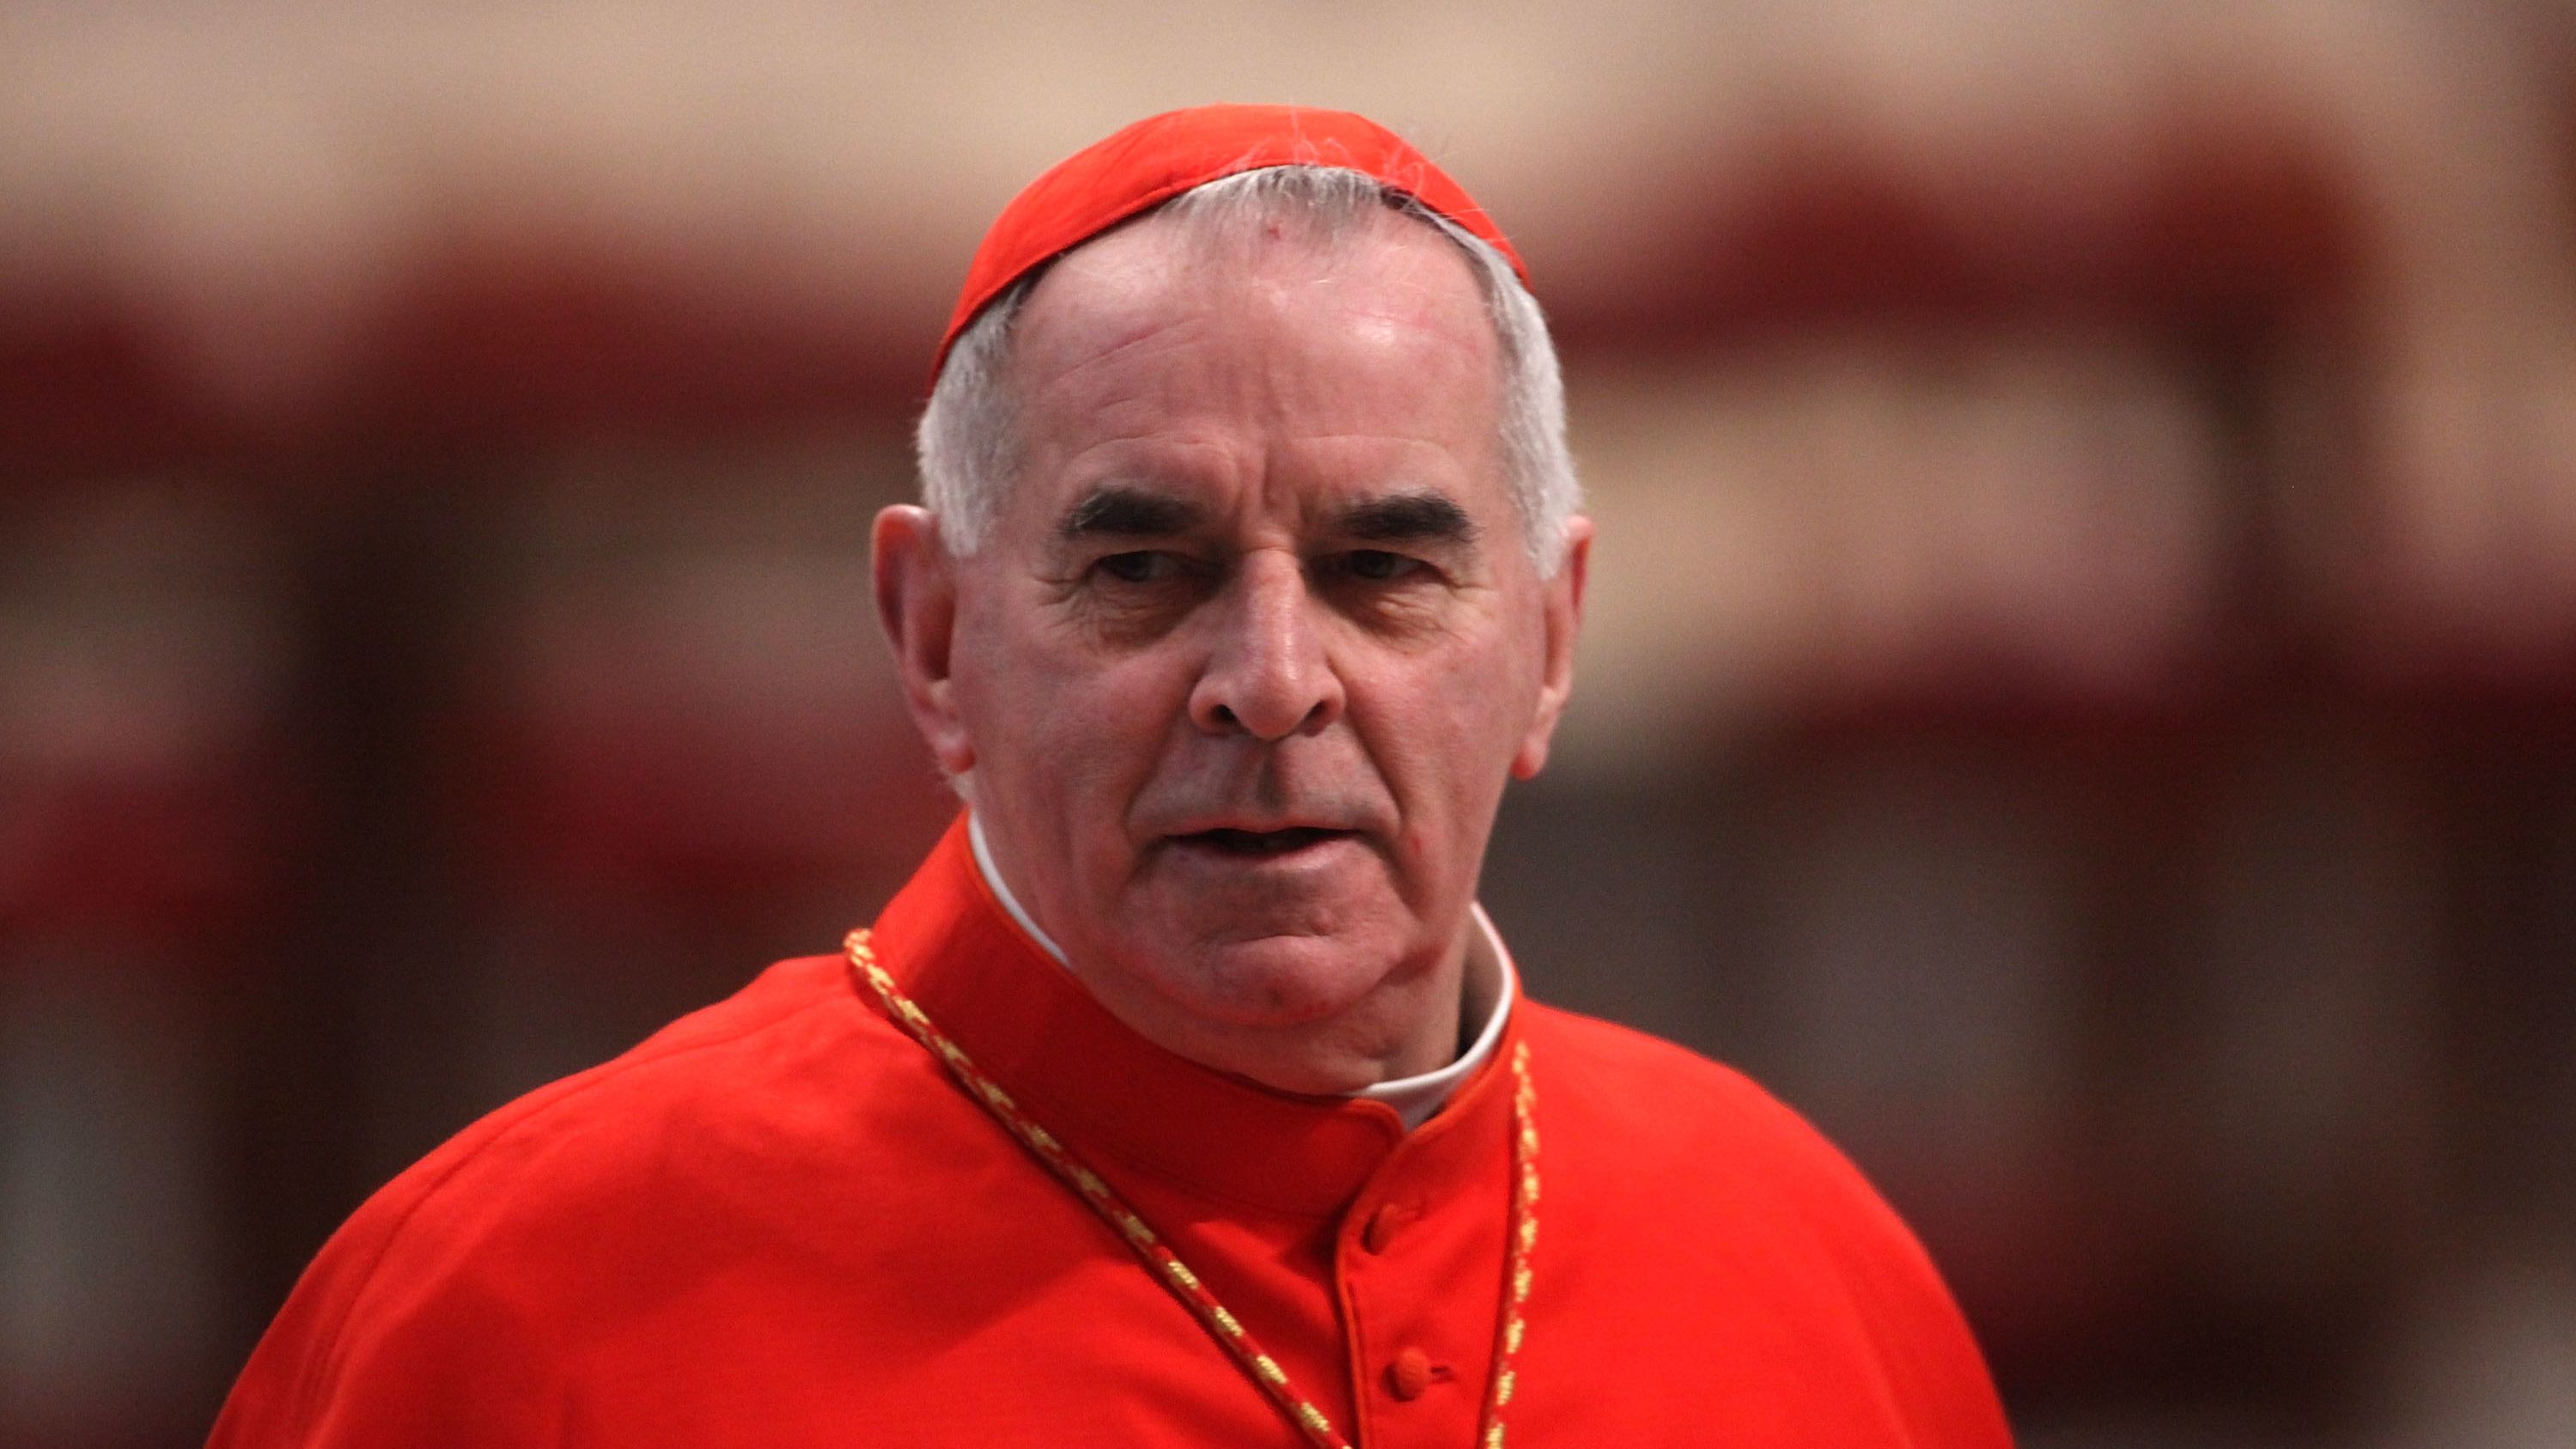 Cardinal Keith O'Brien contests the claims against him "and is seeking legal advice," the Scottish Catholic Media Office told CNN.